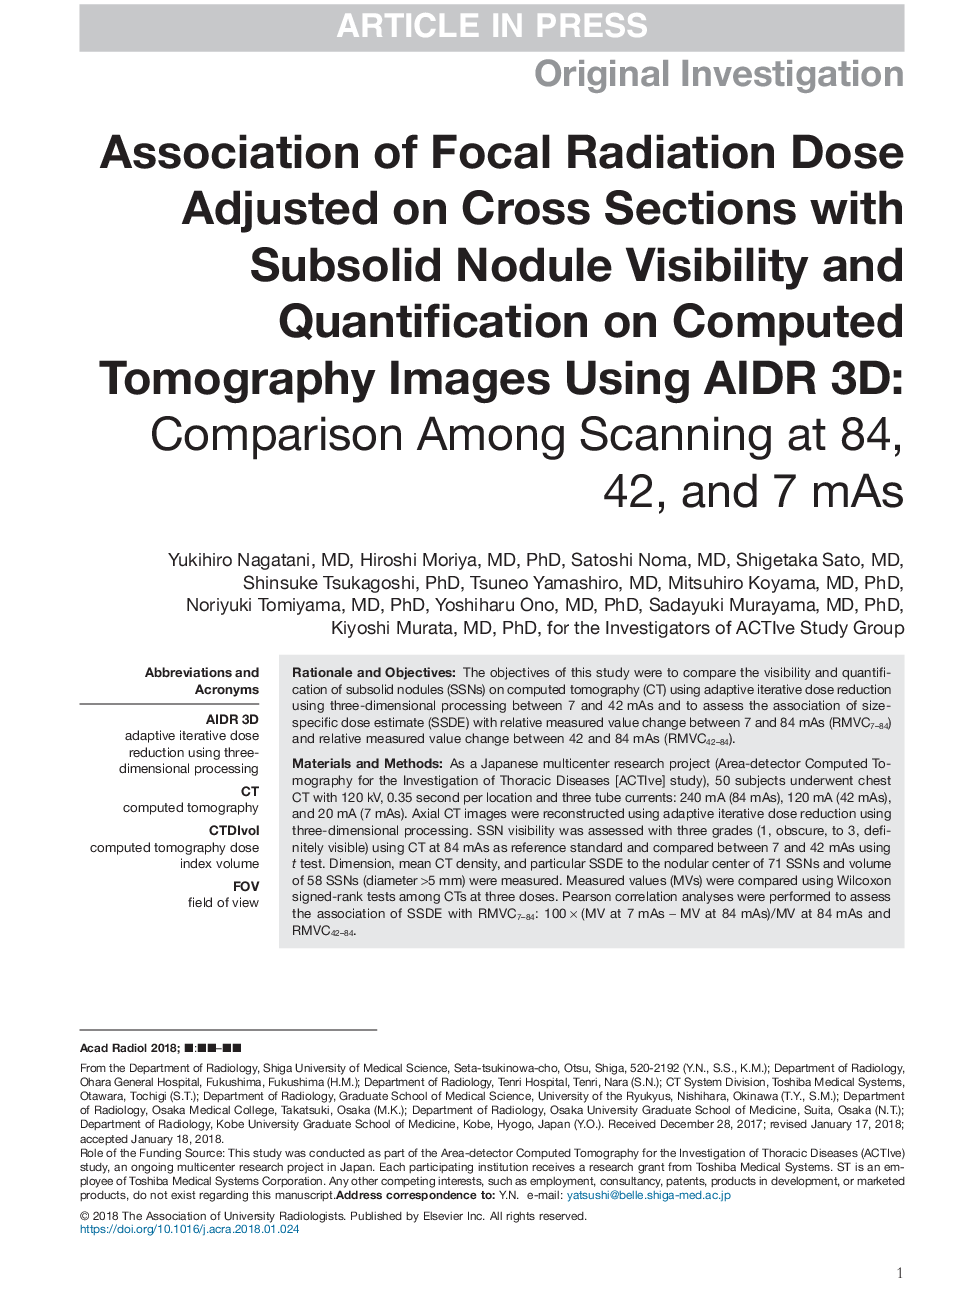 Association of Focal Radiation Dose Adjusted on Cross Sections with Subsolid Nodule Visibility and Quantification on Computed Tomography Images Using AIDR 3D